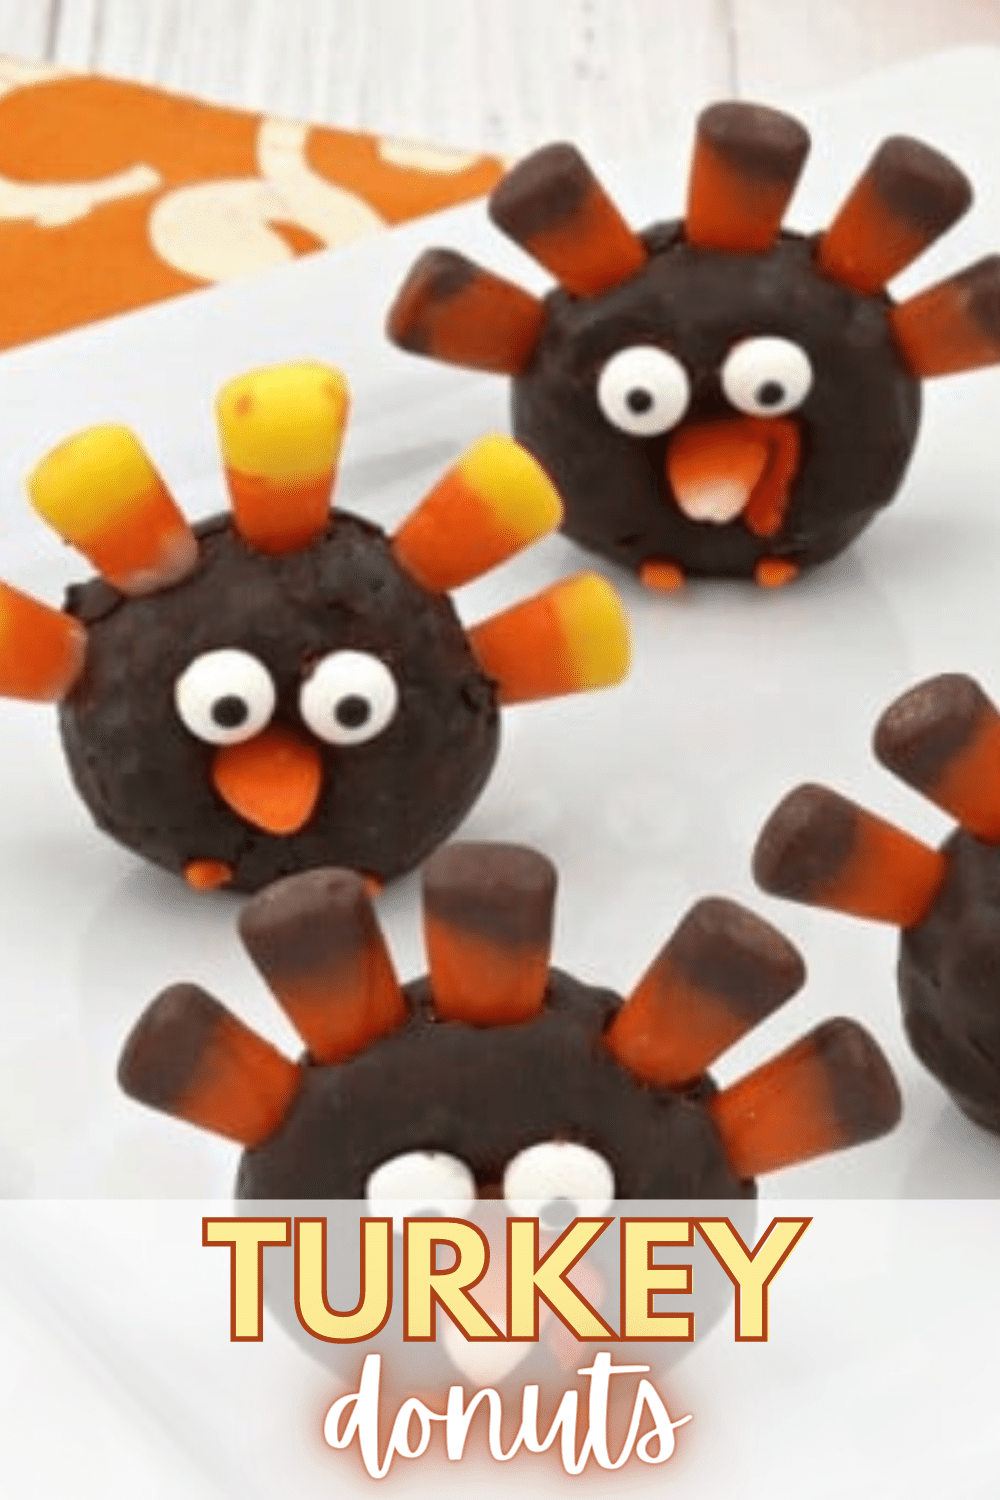 These mini donut turkeys are an adorable Thanksgiving treat and they're super easy to make! #Thanksgiving #funfood via @wondermomwannab